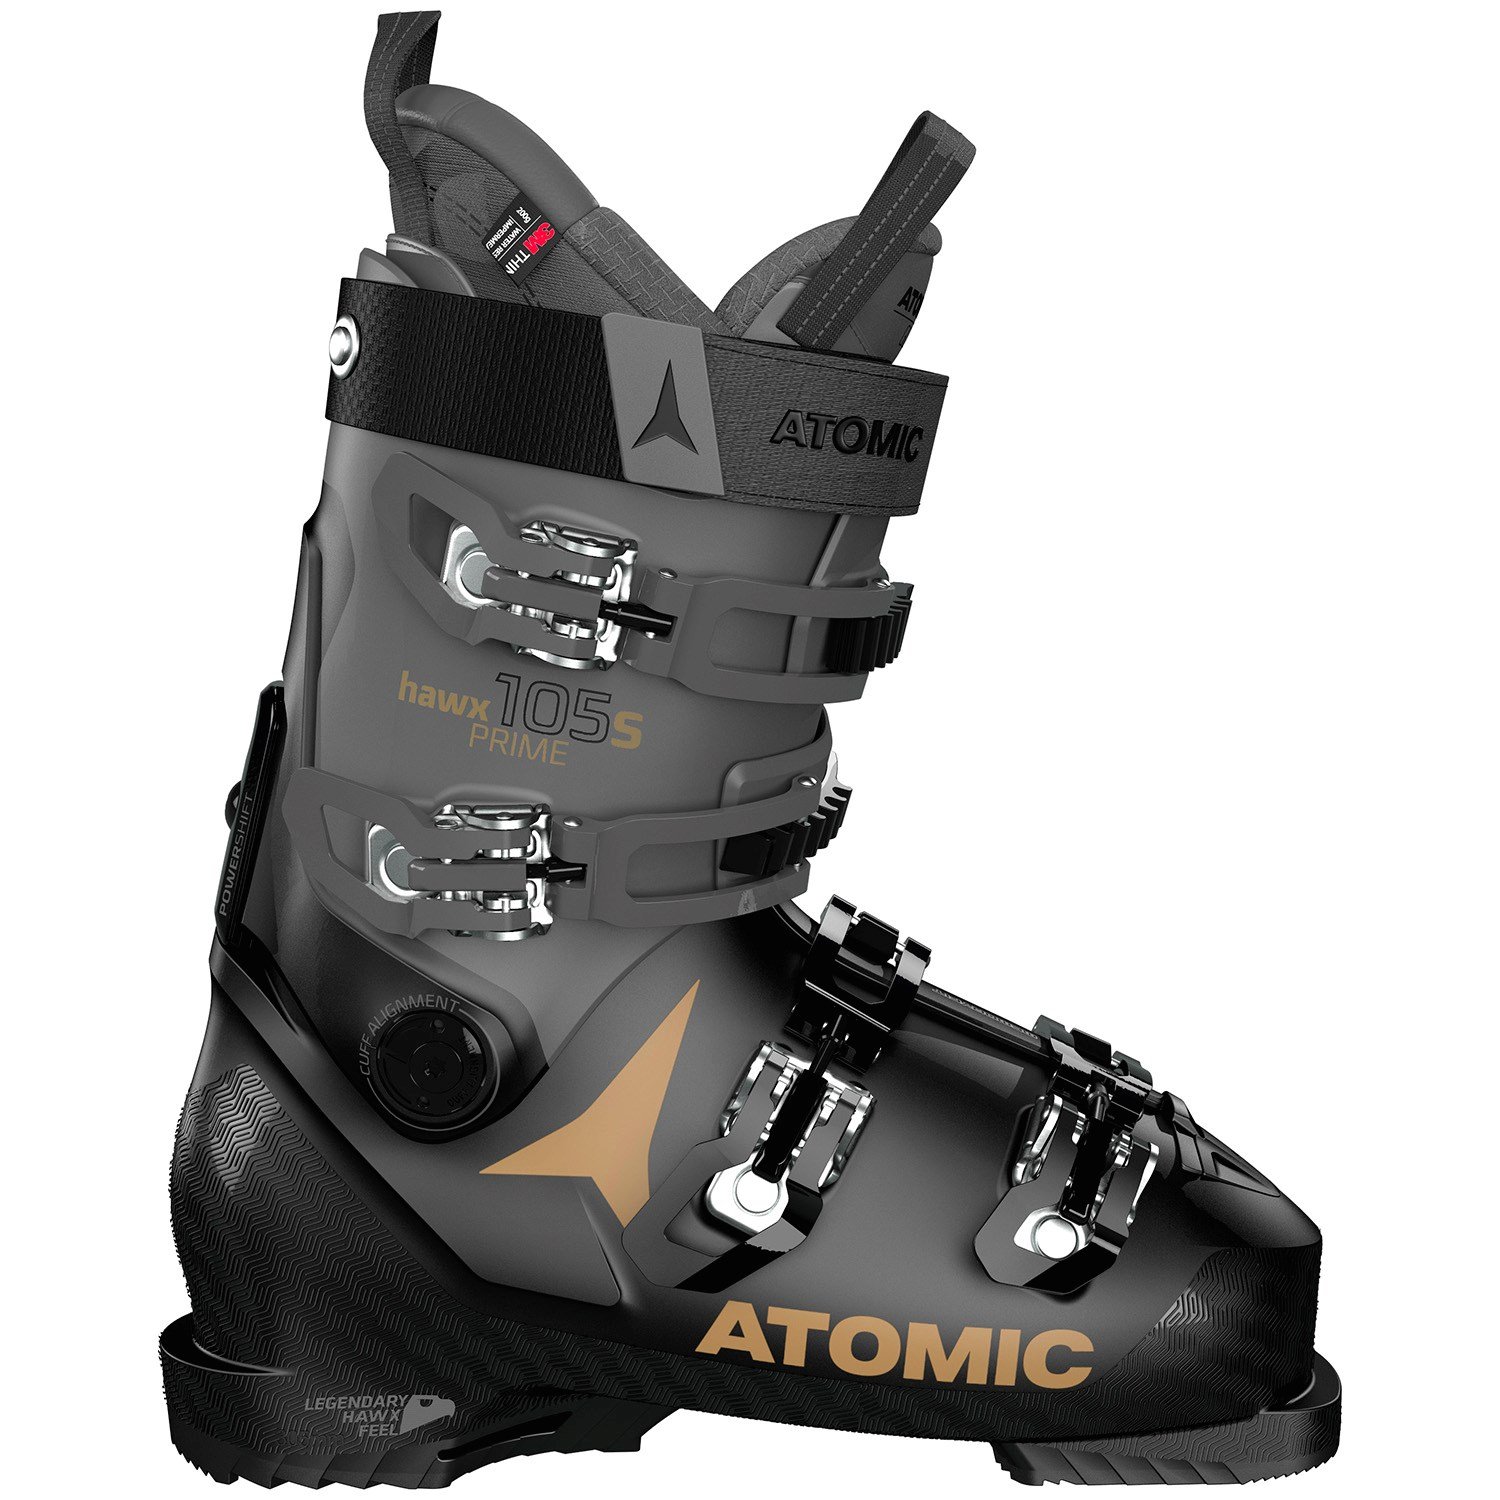 23.5 ski boot size to us